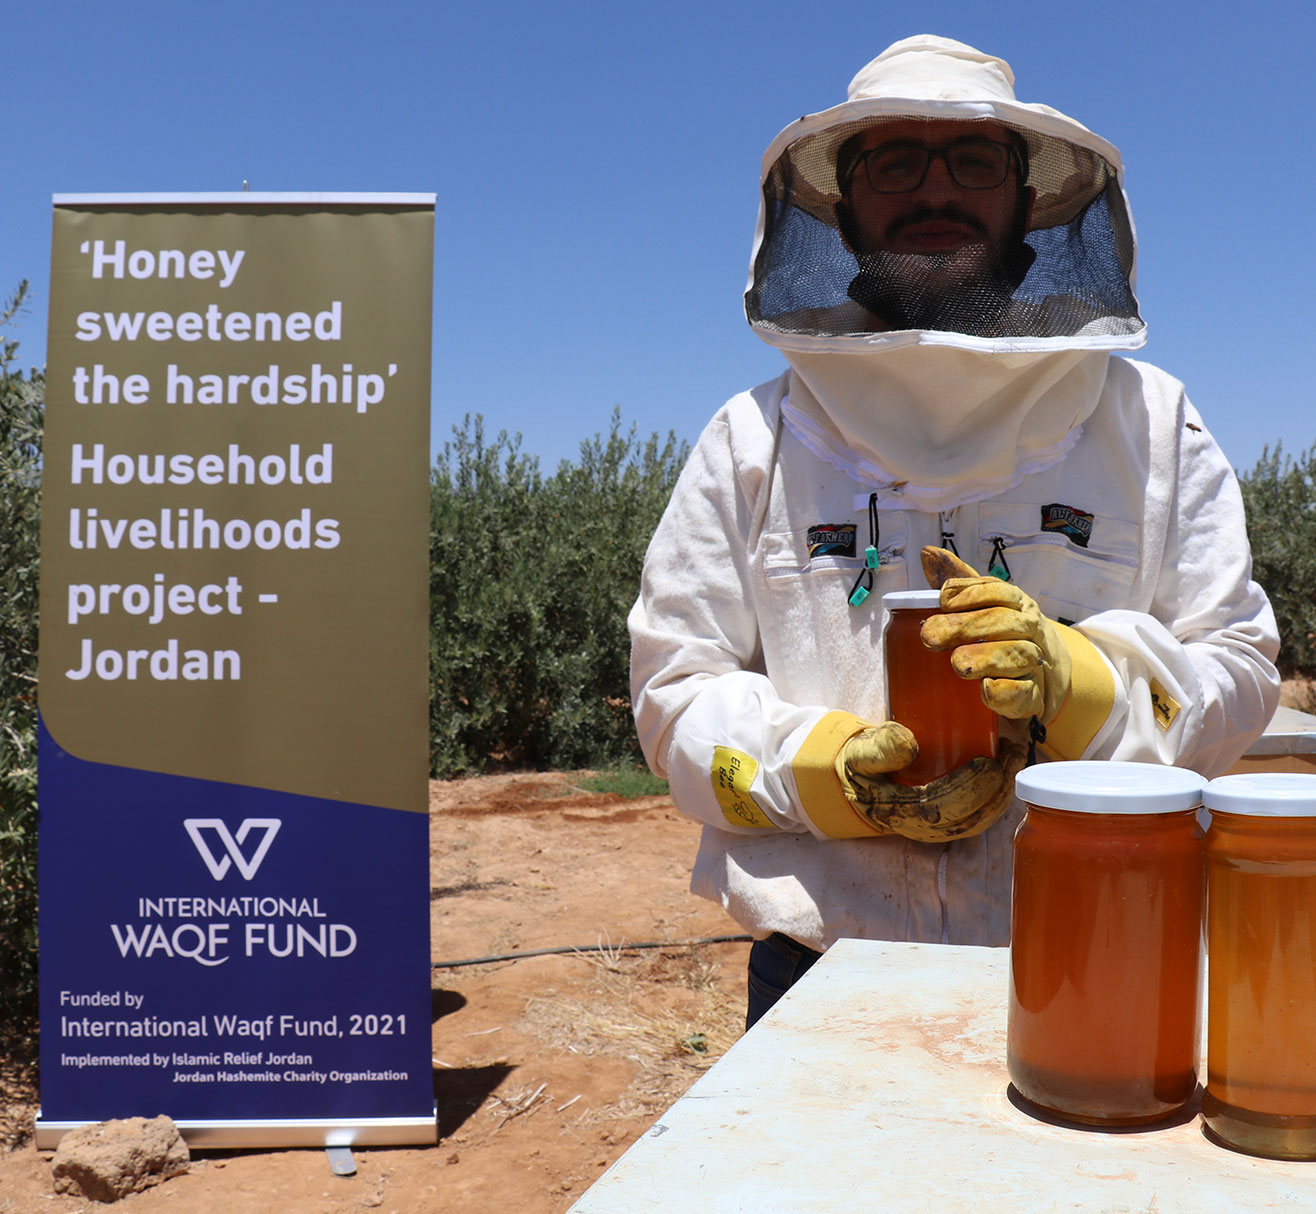 Sustainable Futures - Waqf donation website free